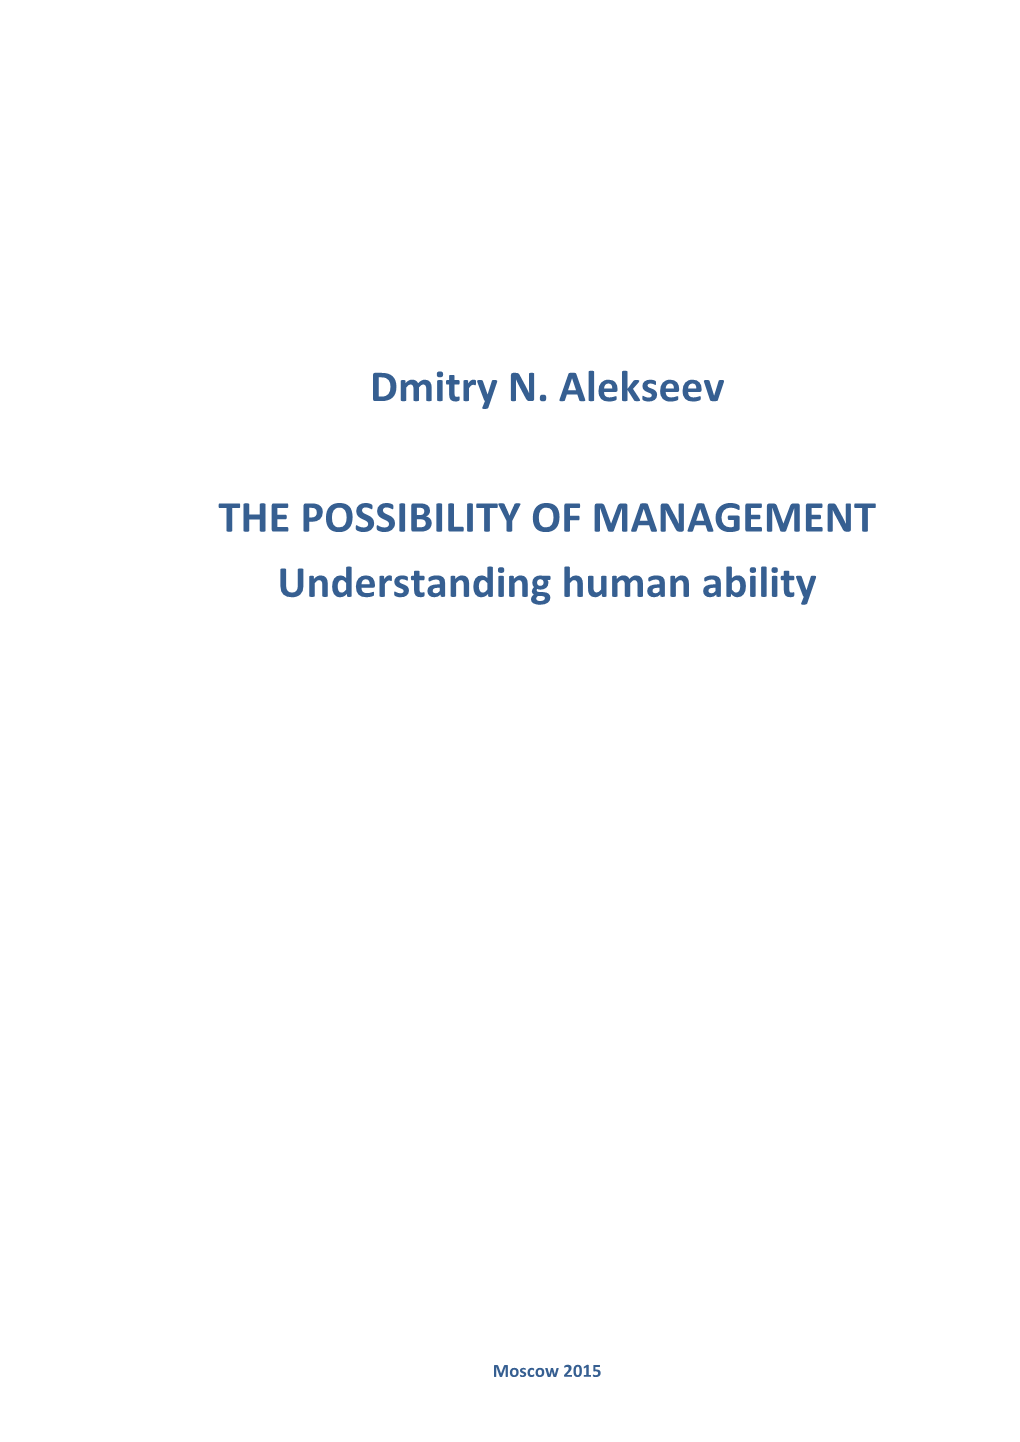 Dmitry N. Alekseev the POSSIBILITY of MANAGEMENT Understanding